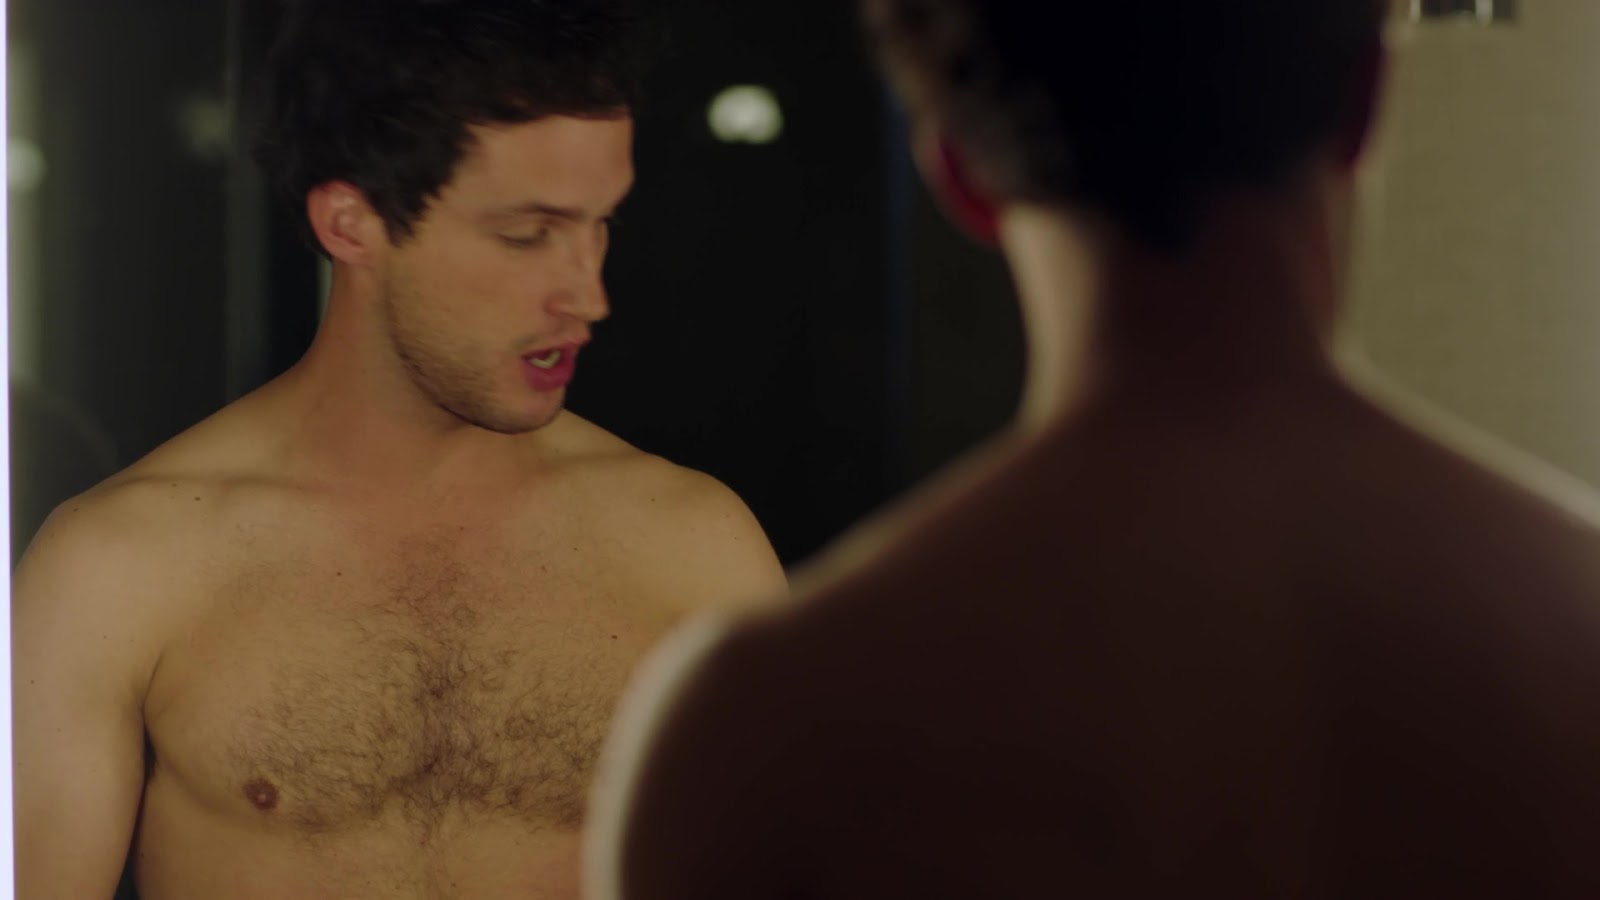 Parker Young and Rob Heaps shirtless in Imposters 1-02 "My Balls, Dick...